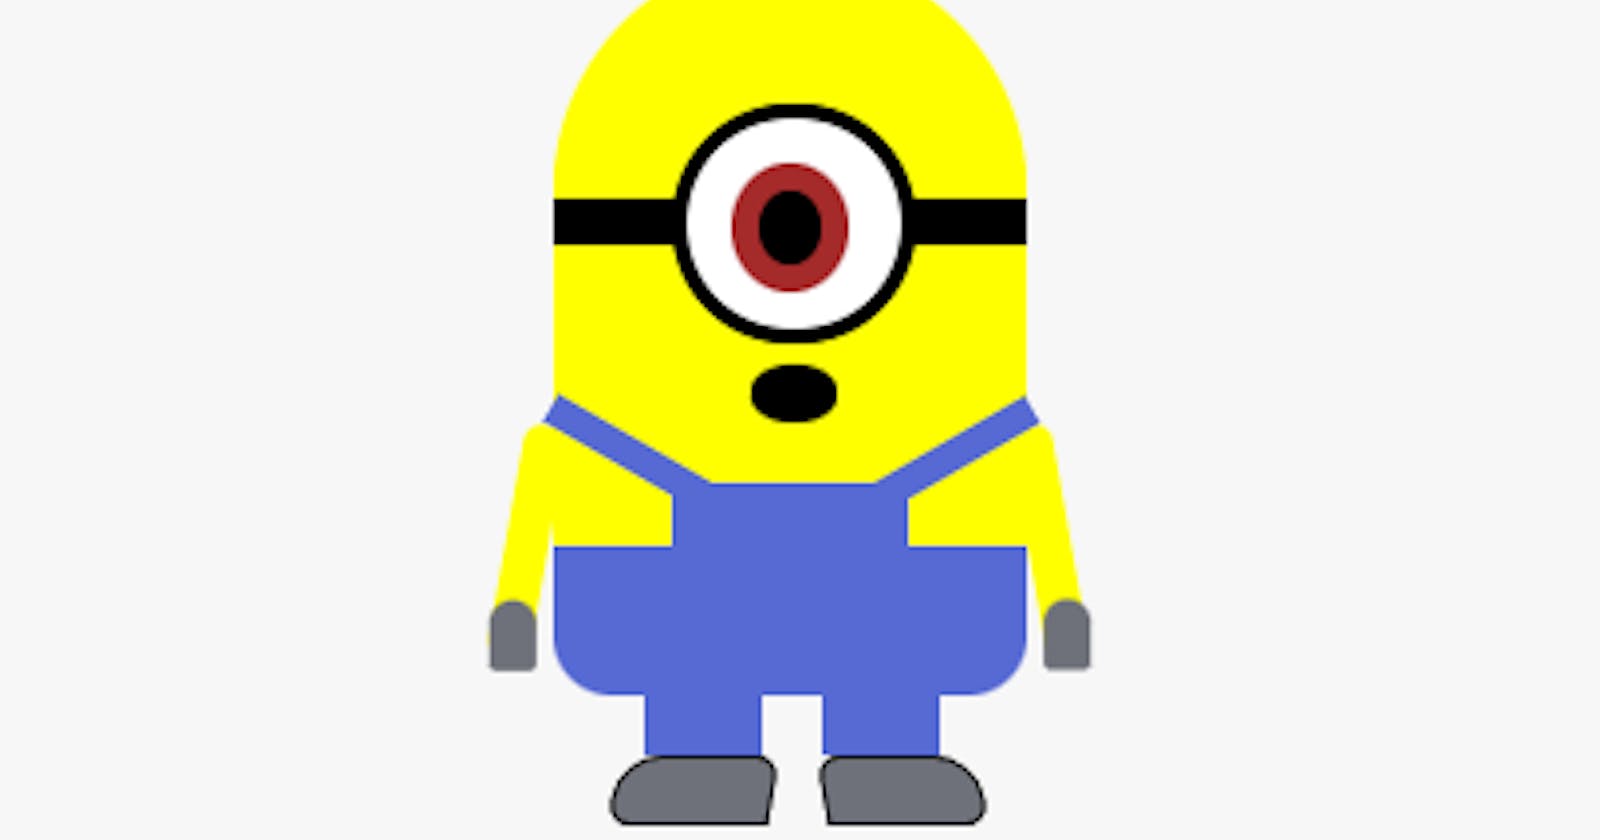 How to Make an Animated Minion using CSS